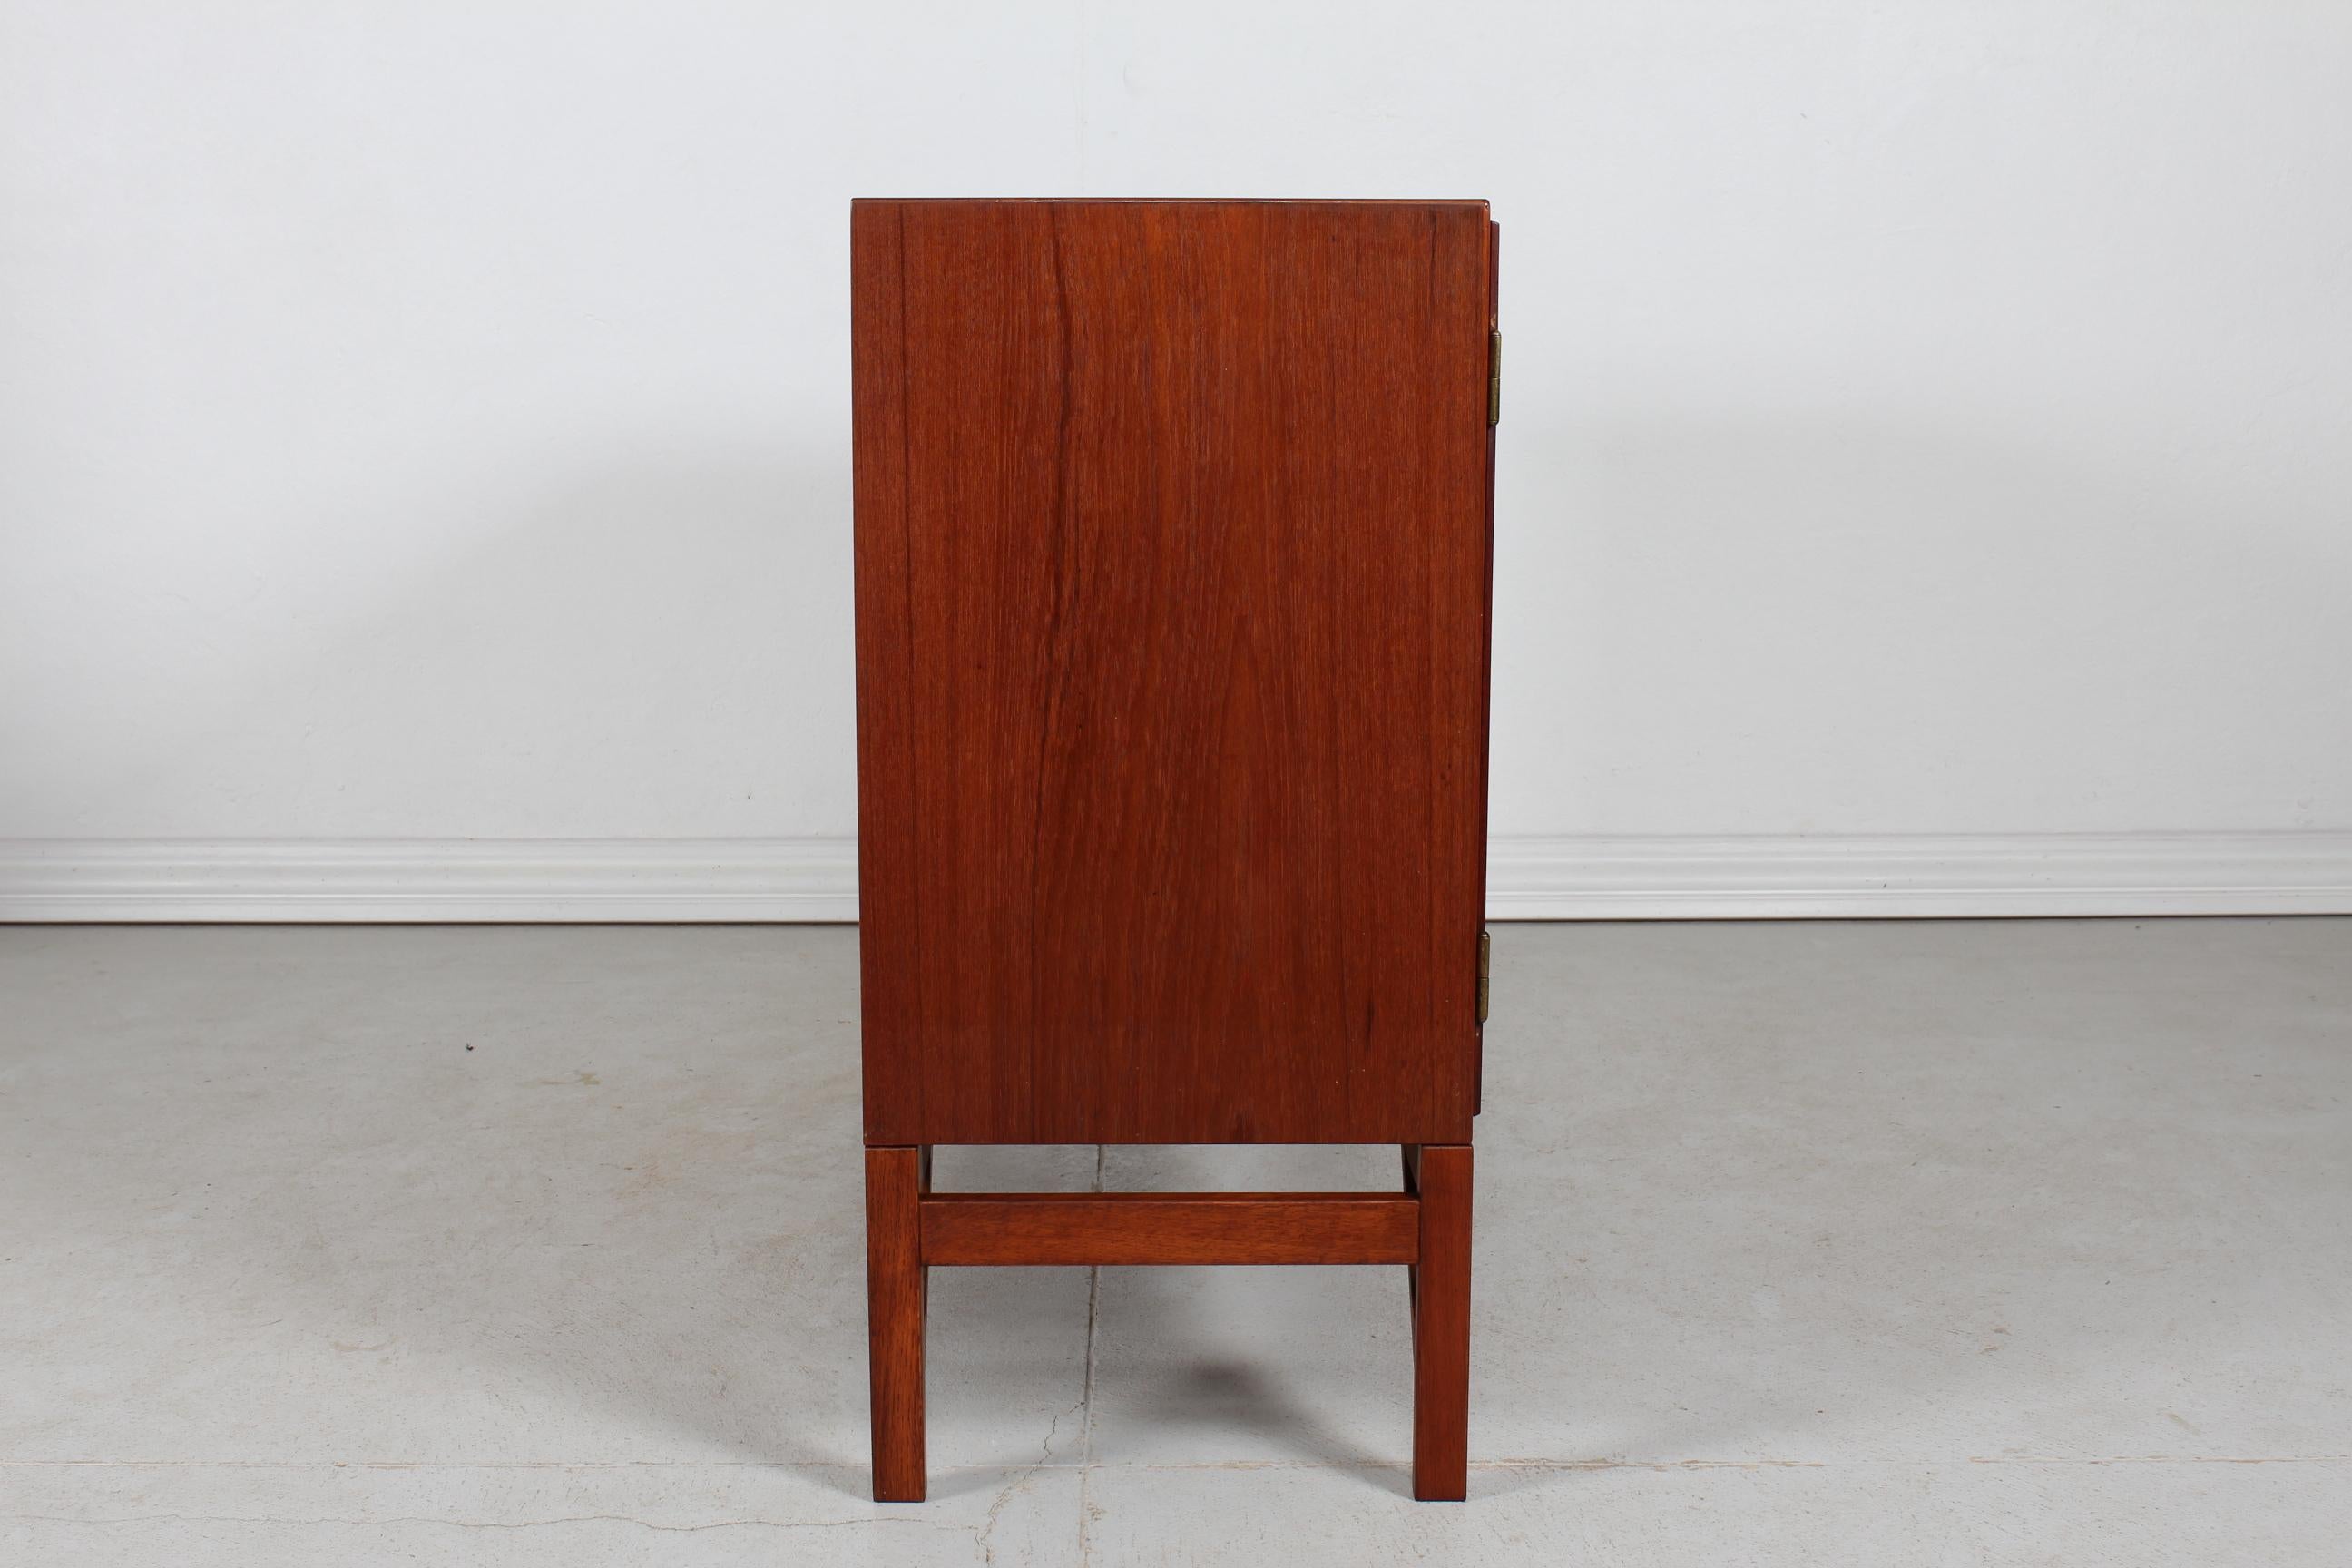 Børge Mogensen Teak Sideboard with China Legs of Oak Made for FDB Møbler 1960s In Good Condition For Sale In Aarhus C, DK